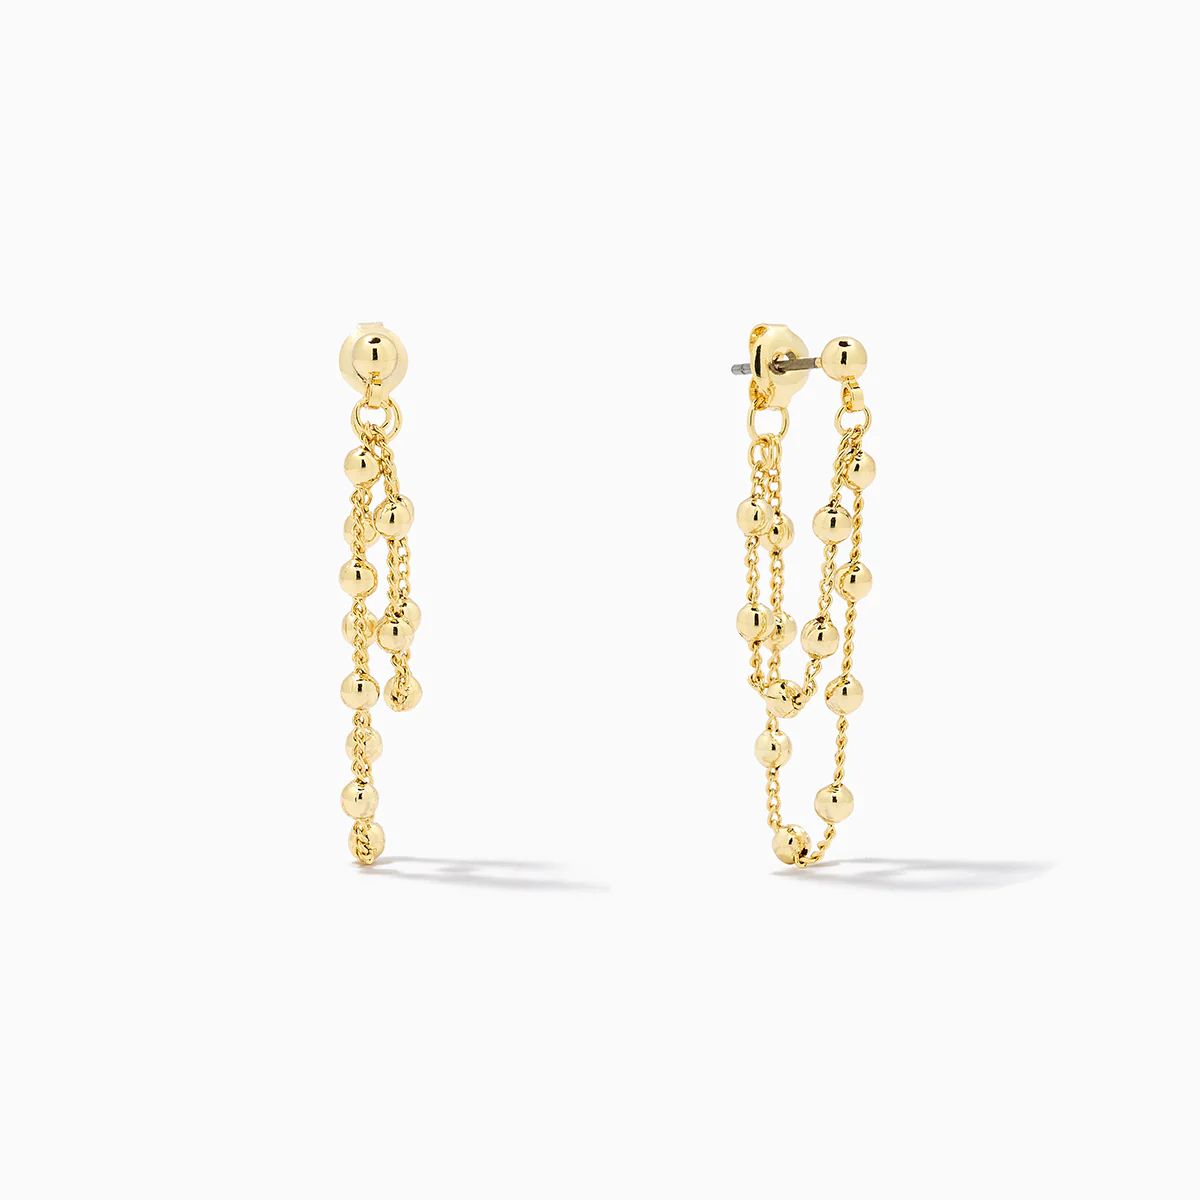 Ball and Chain Earrings | Uncommon James